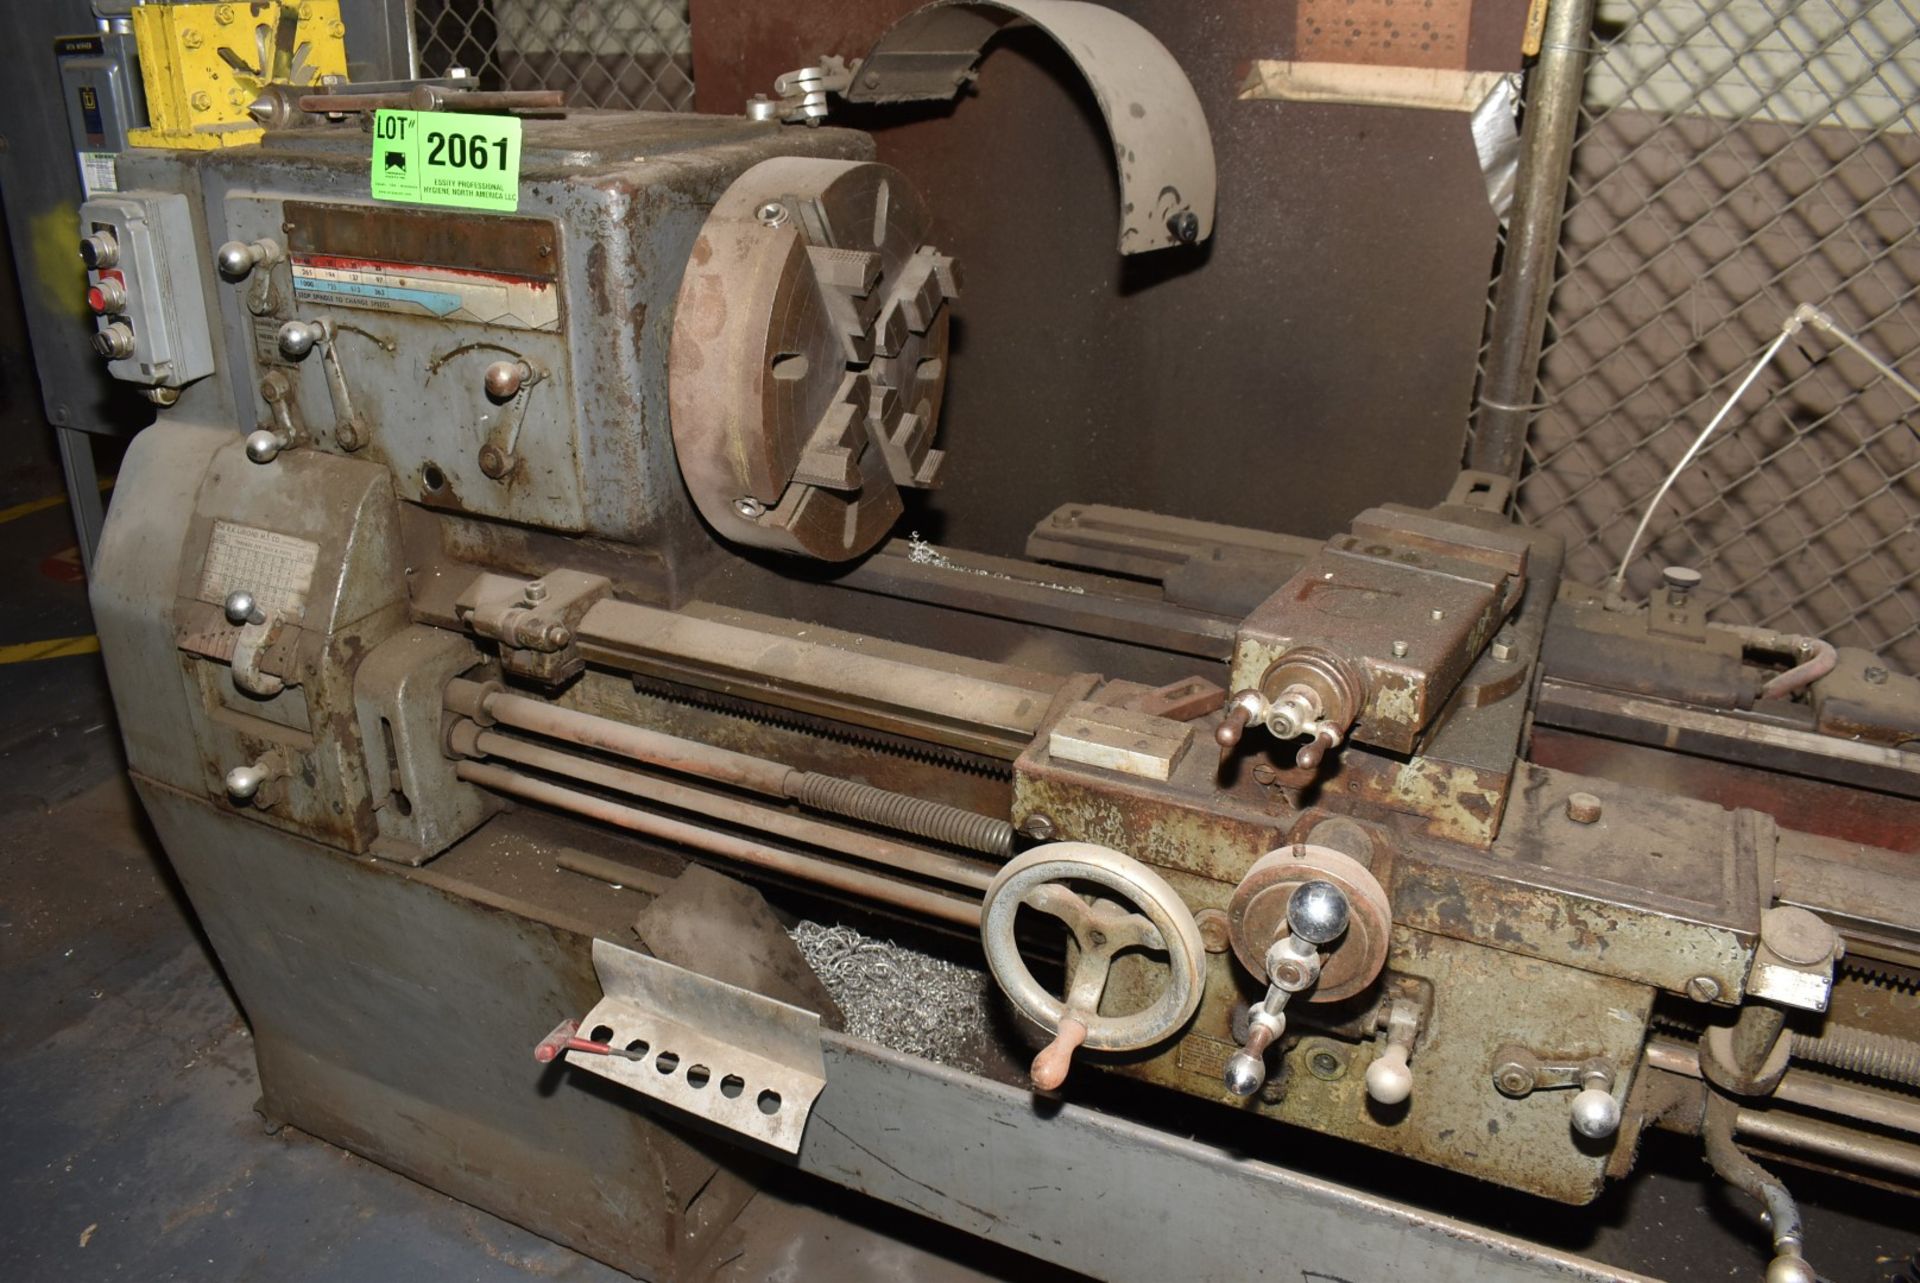 LEBLOND RK ENGINE LATHE WITH 22" SWING, 60" BETWEEN CENTERS, 12" 4-JAW CHUCK, SPEEDS TO 1000 RPM, - Image 3 of 6